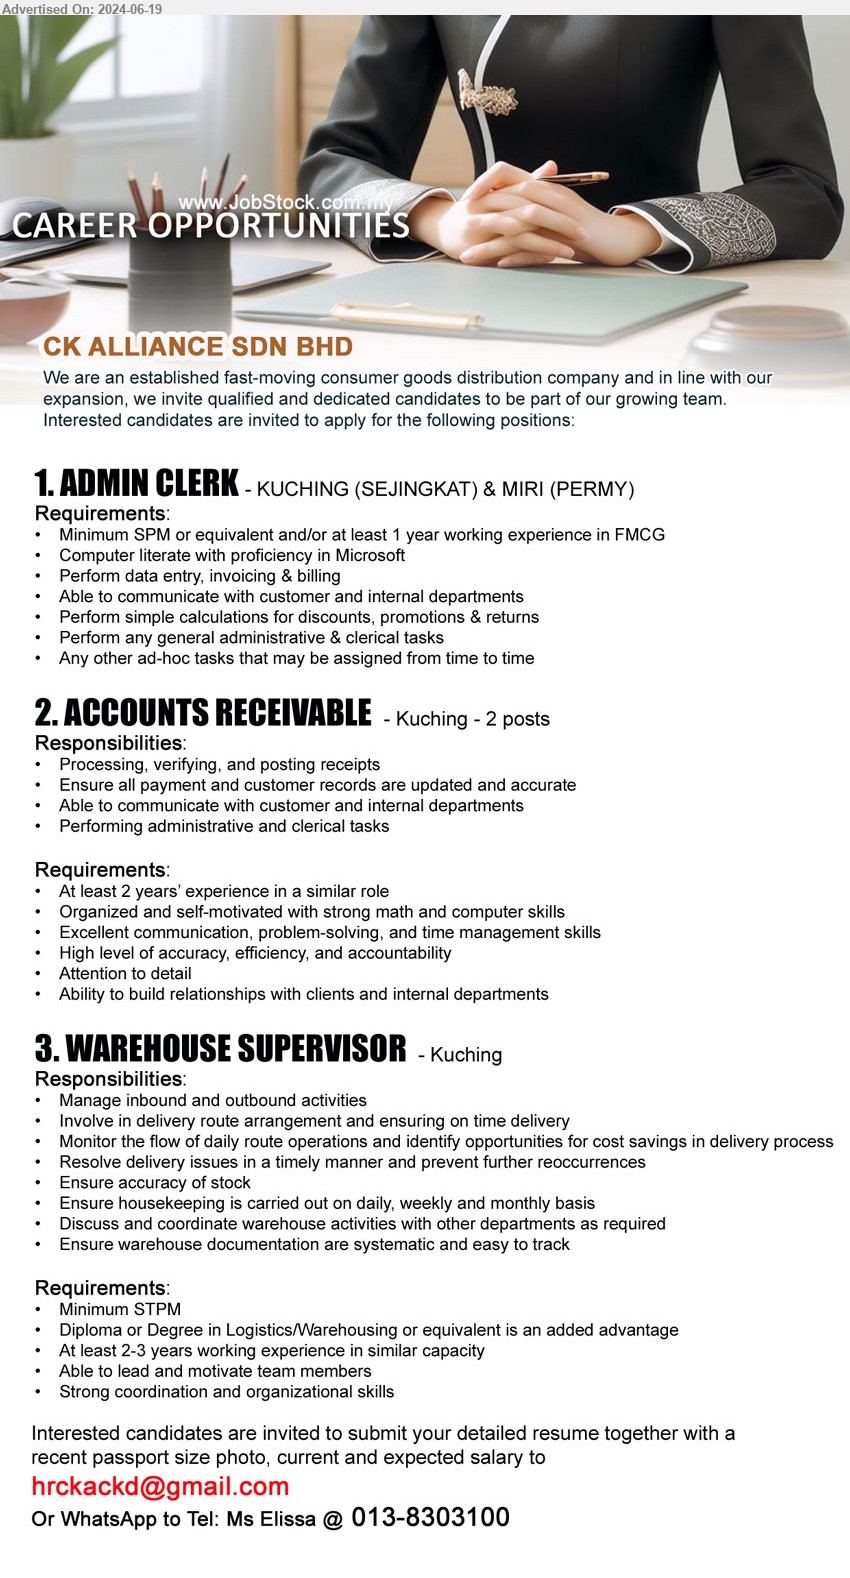 CK ALLIANCE SDN BHD - 1. ADMIN CLERK  (Kuching, Miri), Minimum SPM or equivalent and/or at least 1 year working experience in FMCG,...
2. ACCOUNTS RECEIVABLE (Kuching), 2 posts, 2 yrs. exp., Organized and self-motivated with strong math and computer skills,...
3. WAREHOUSE SUPERVISOR  (Kuching), Minimum STPM, Diploma or Degree in Logistics/Warehousing or equivalent is an added advantage,...
WhatsApp to Tel: Ms Elissa @ 013-8303100 / Email resume to ...